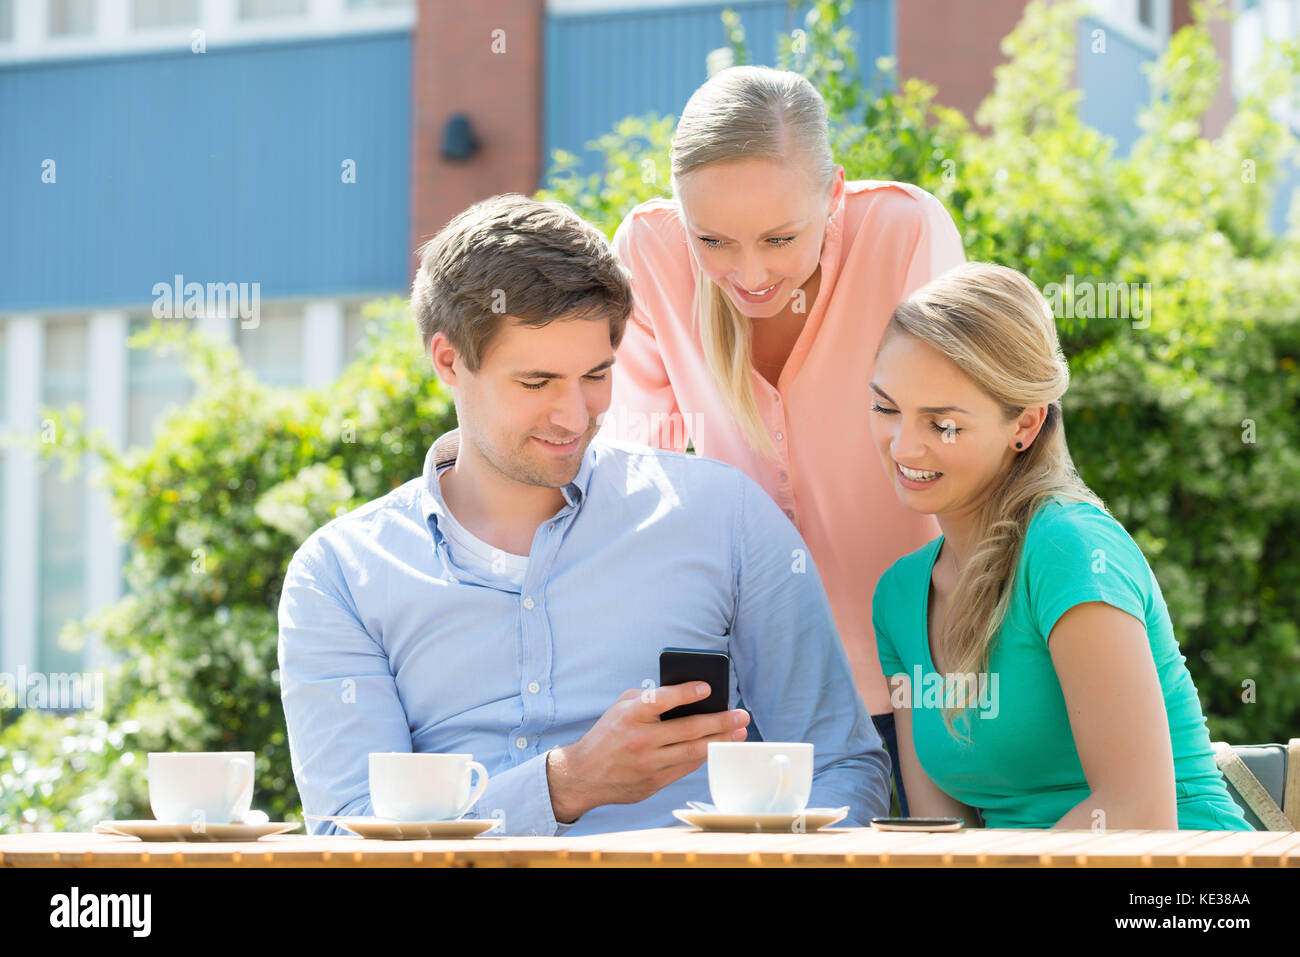 Group Of Happy Young Friends Looking At Mobile Phone In Cafe Stock Photo